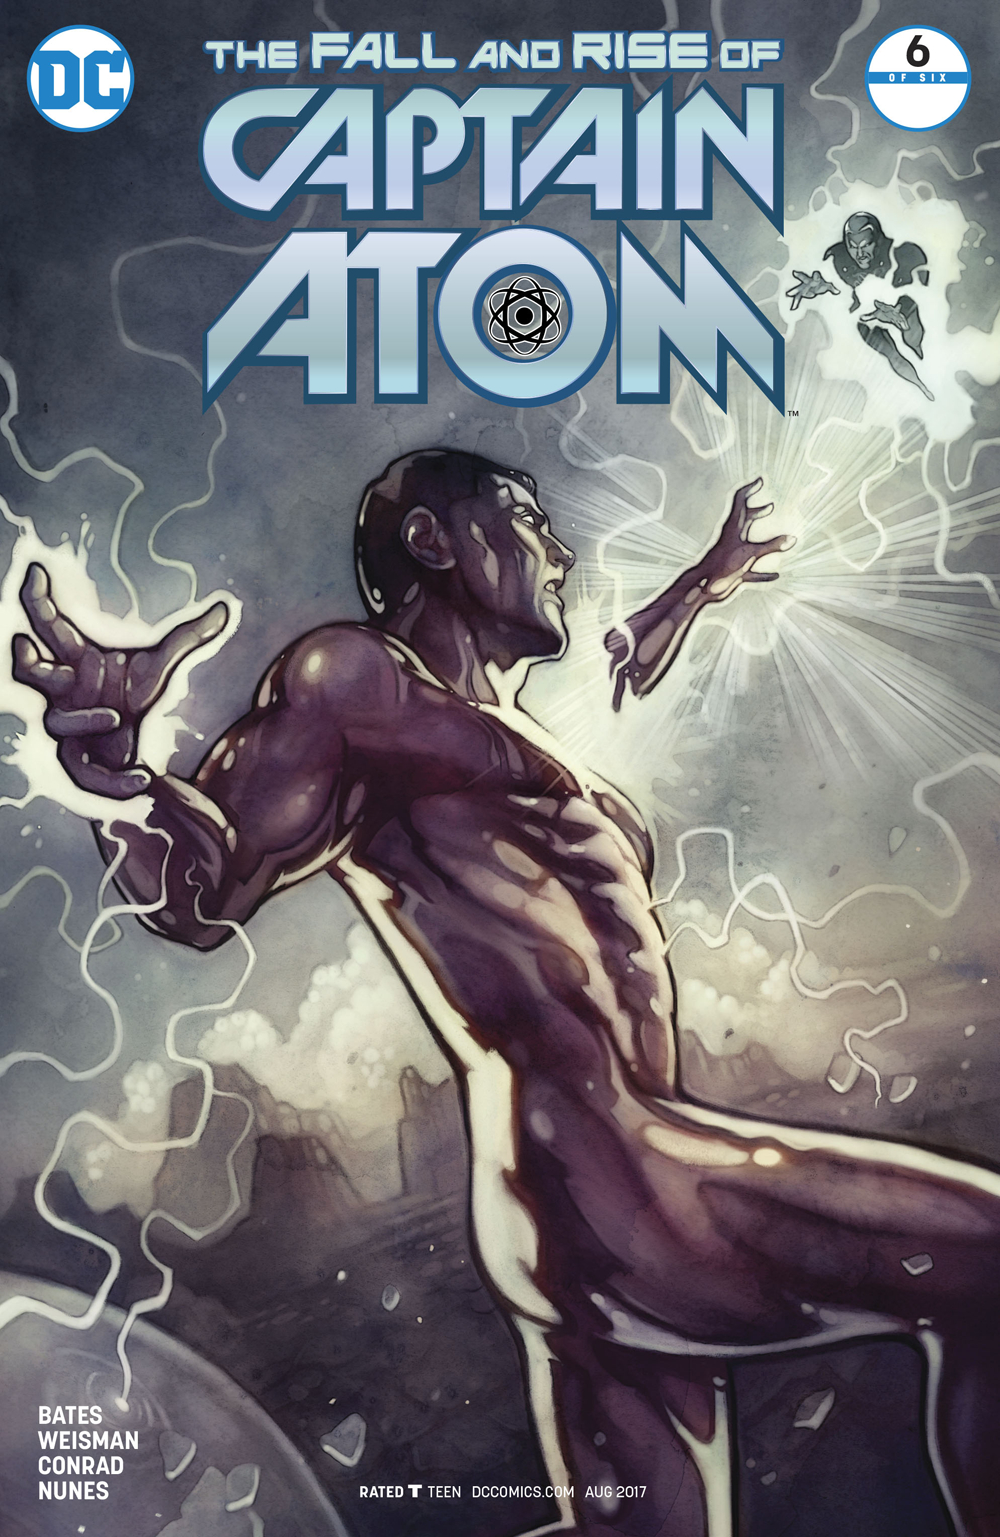 FALL AND RISE OF CAPTAIN ATOM #6 (OF 6)